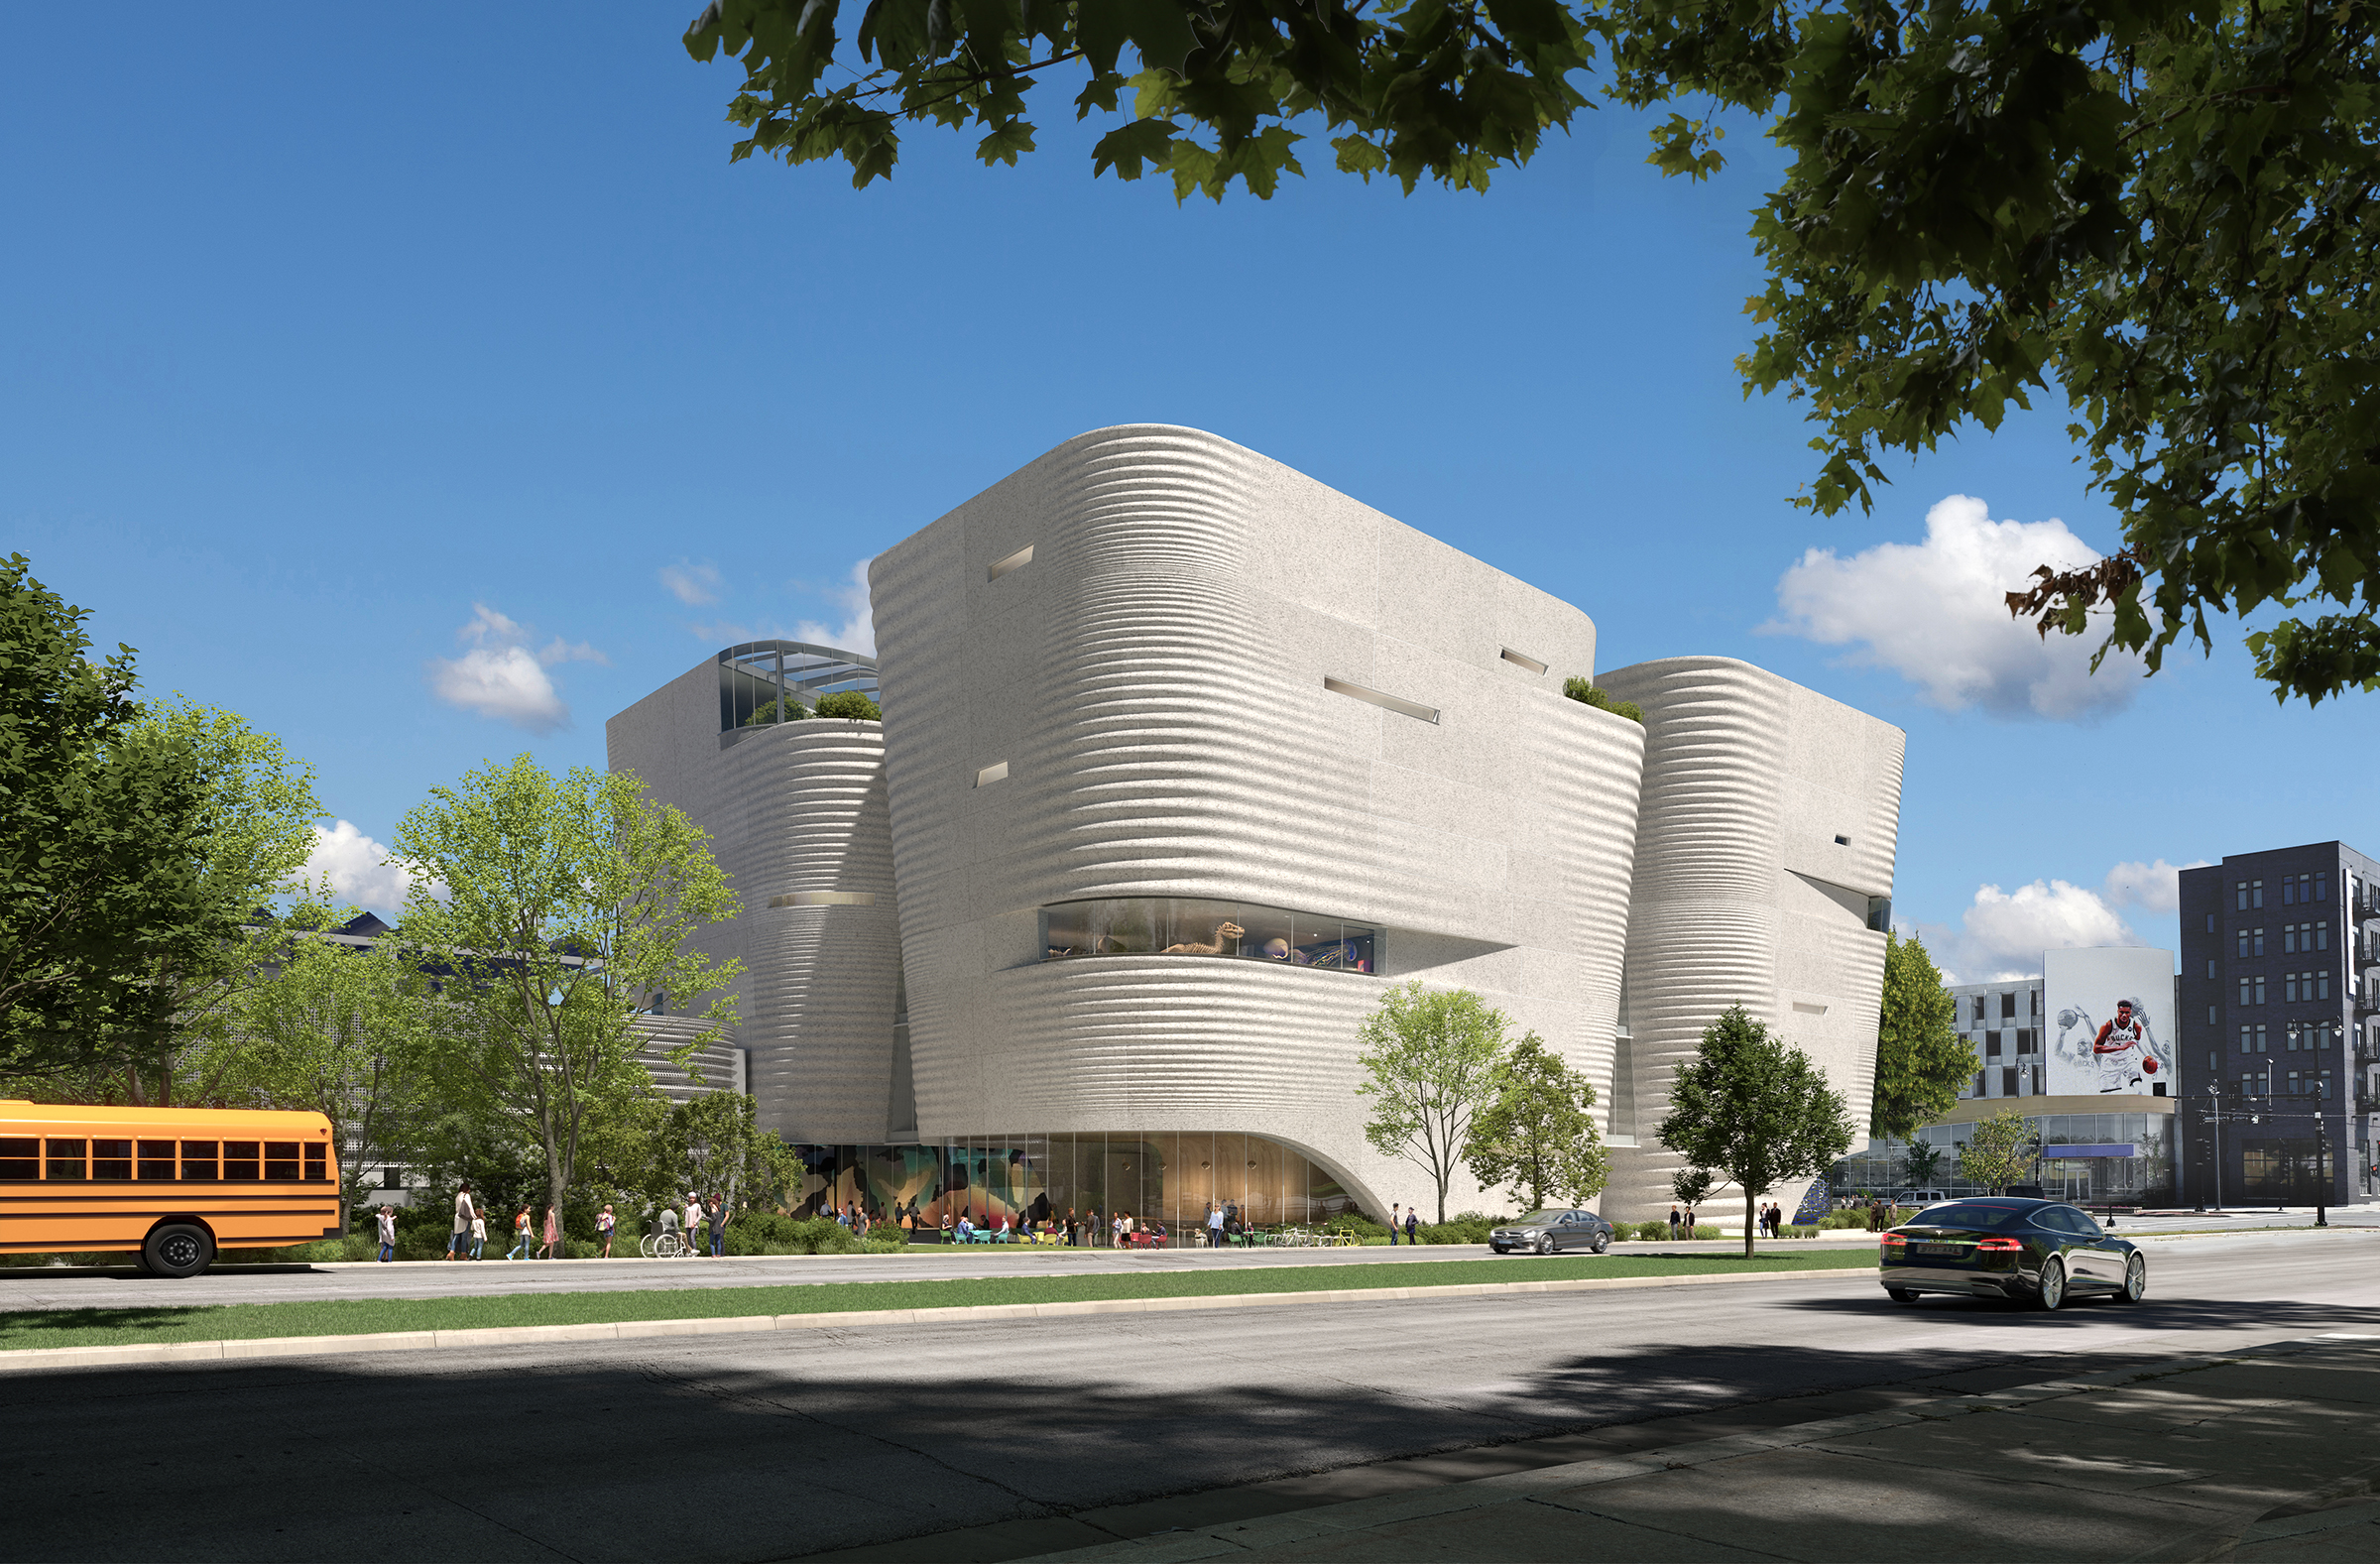 Wisconsin’s glacial landscape inspires design for new Milwaukee museum